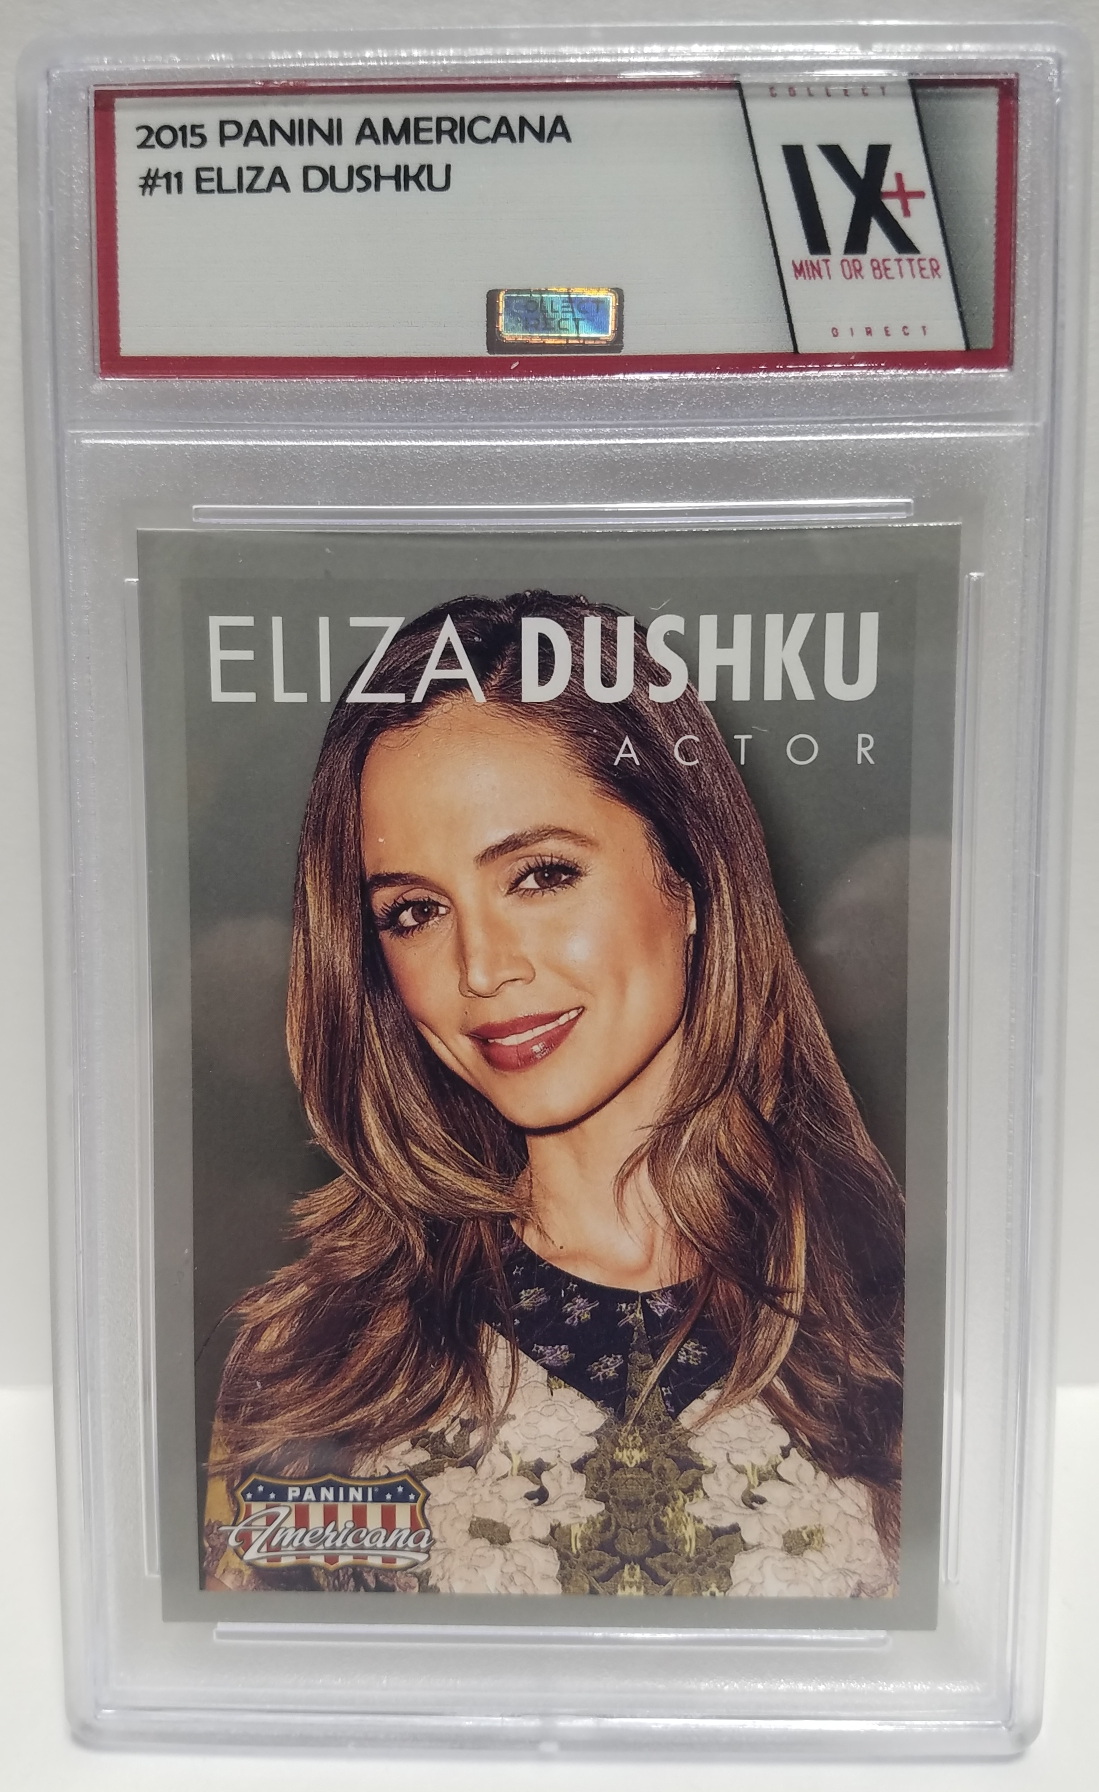 ELIZA DUSHKU 2015 Panini Americana #11 Collect Direct Graded Mint or Better THIS BAY'S LIFE 